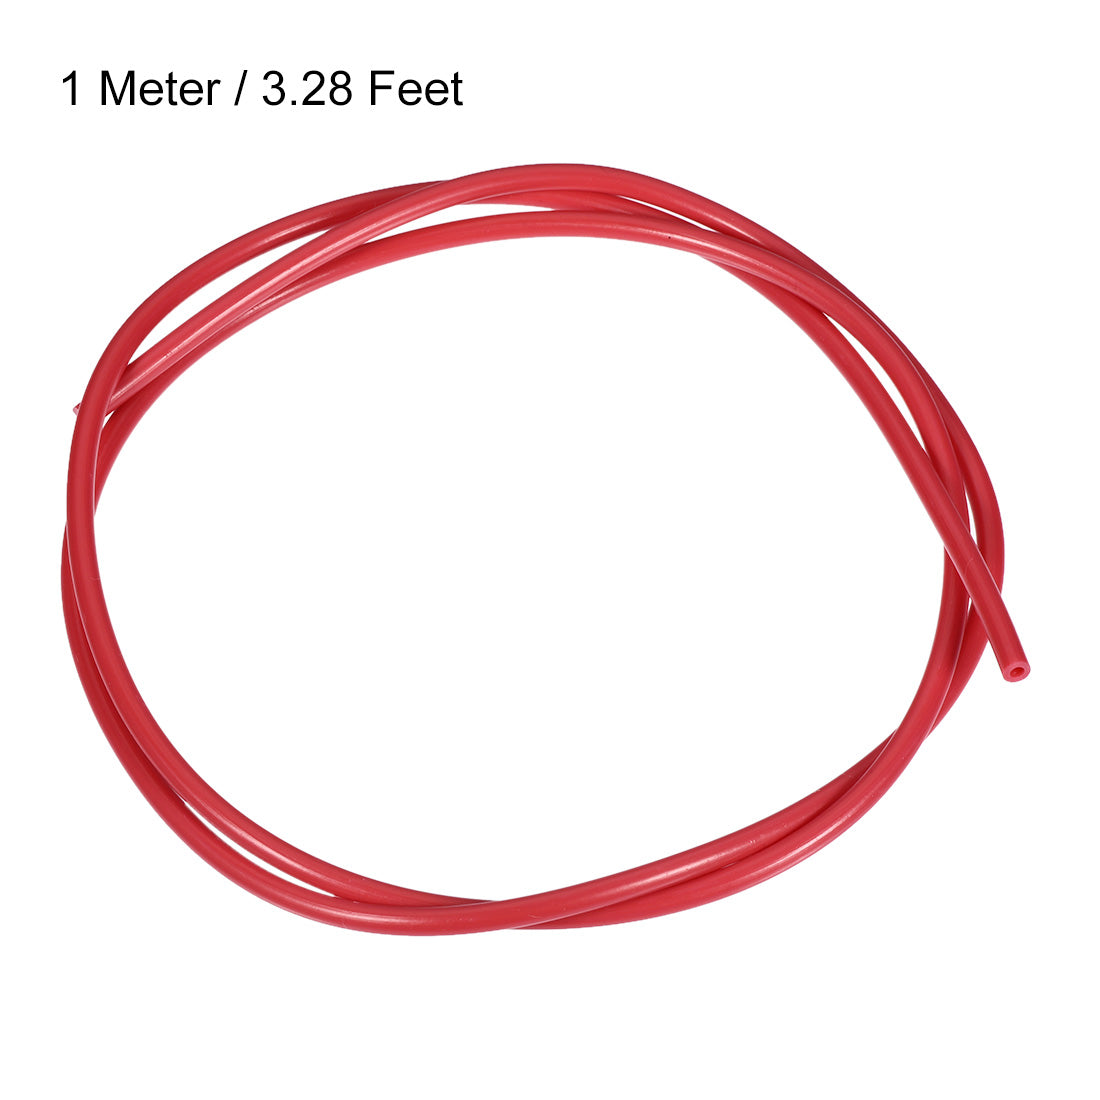 uxcell Uxcell PTFE Tube 3.2Ft - ID 2mm x OD 4mm Fit 1.75 Filament for 3D Printer Red